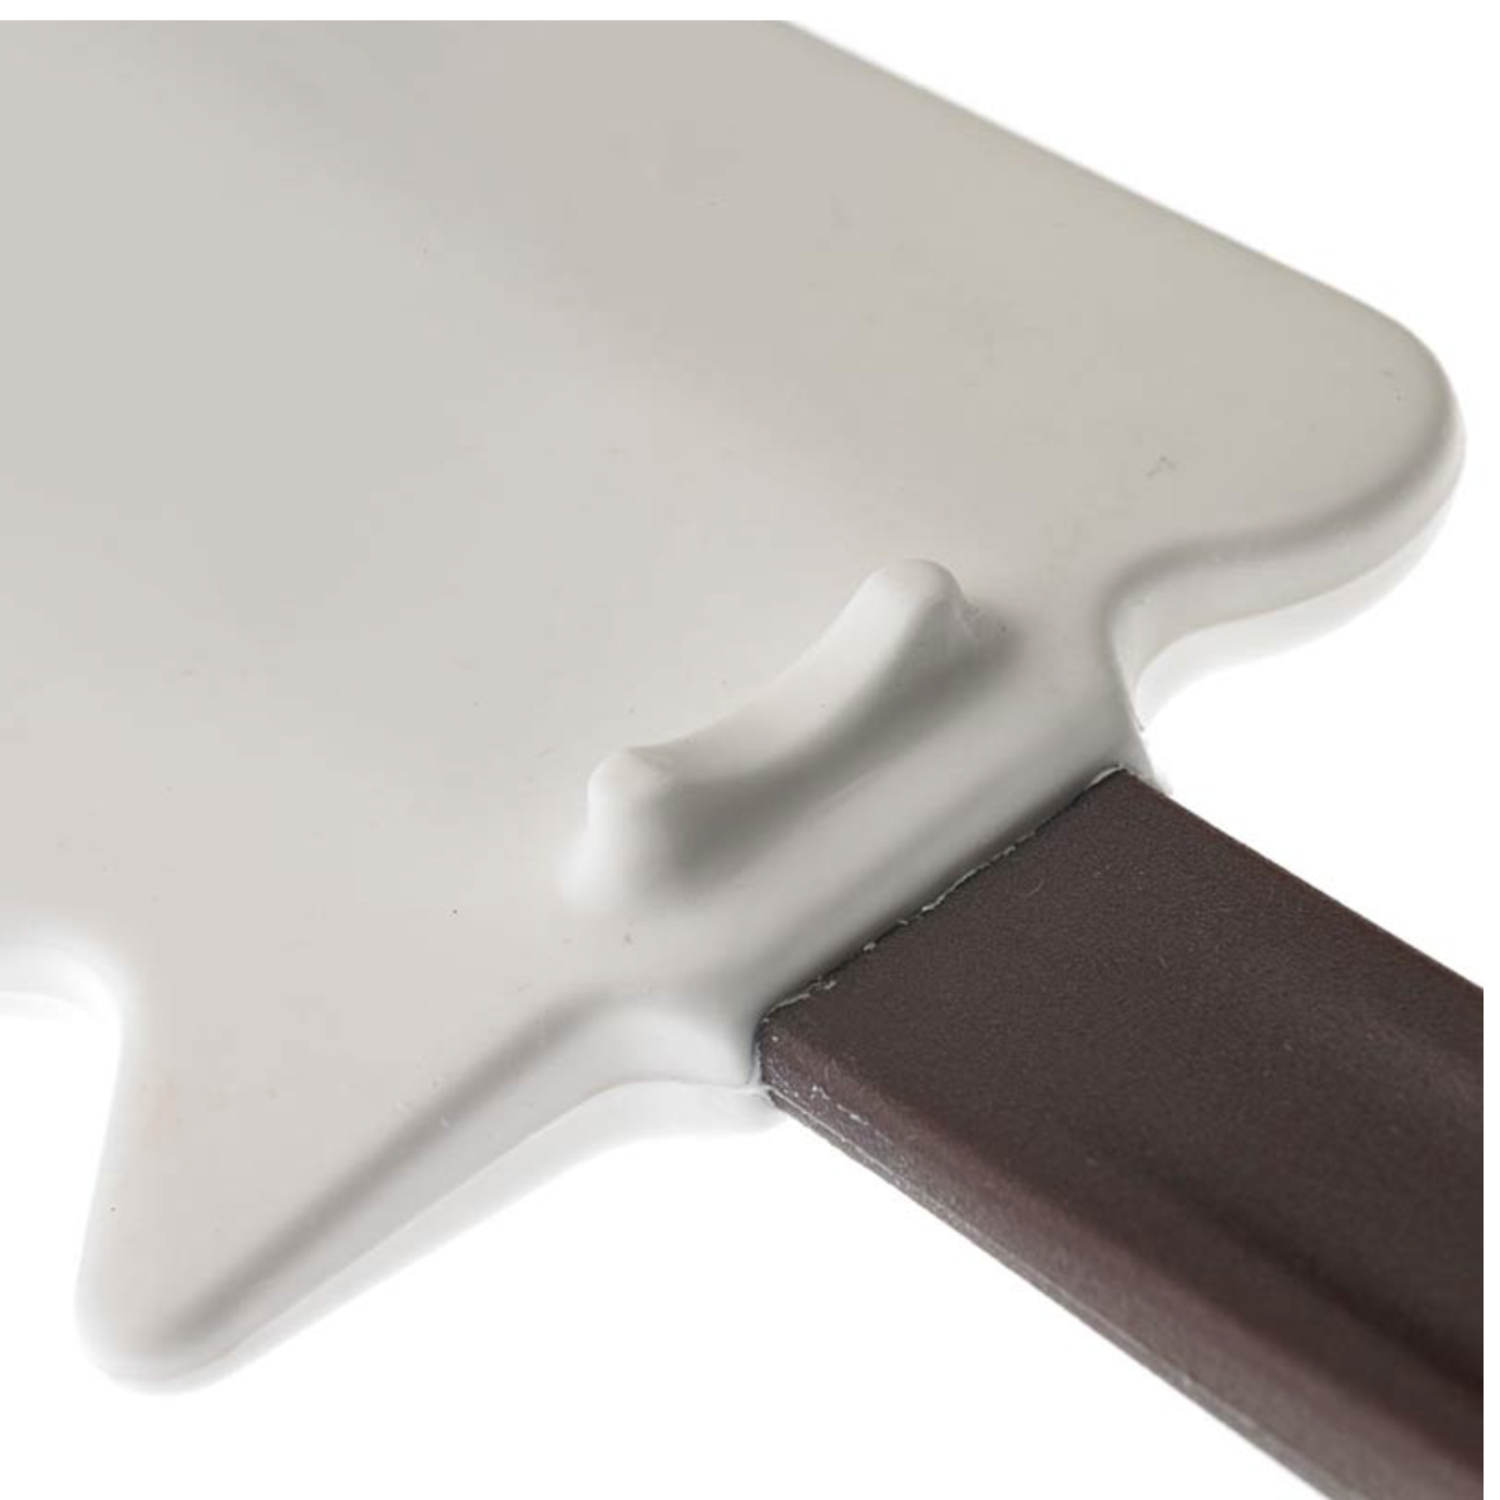 Linden Sweden 2841200 15 White High-Heat Silicone Spatula with Stainless Steel Handle